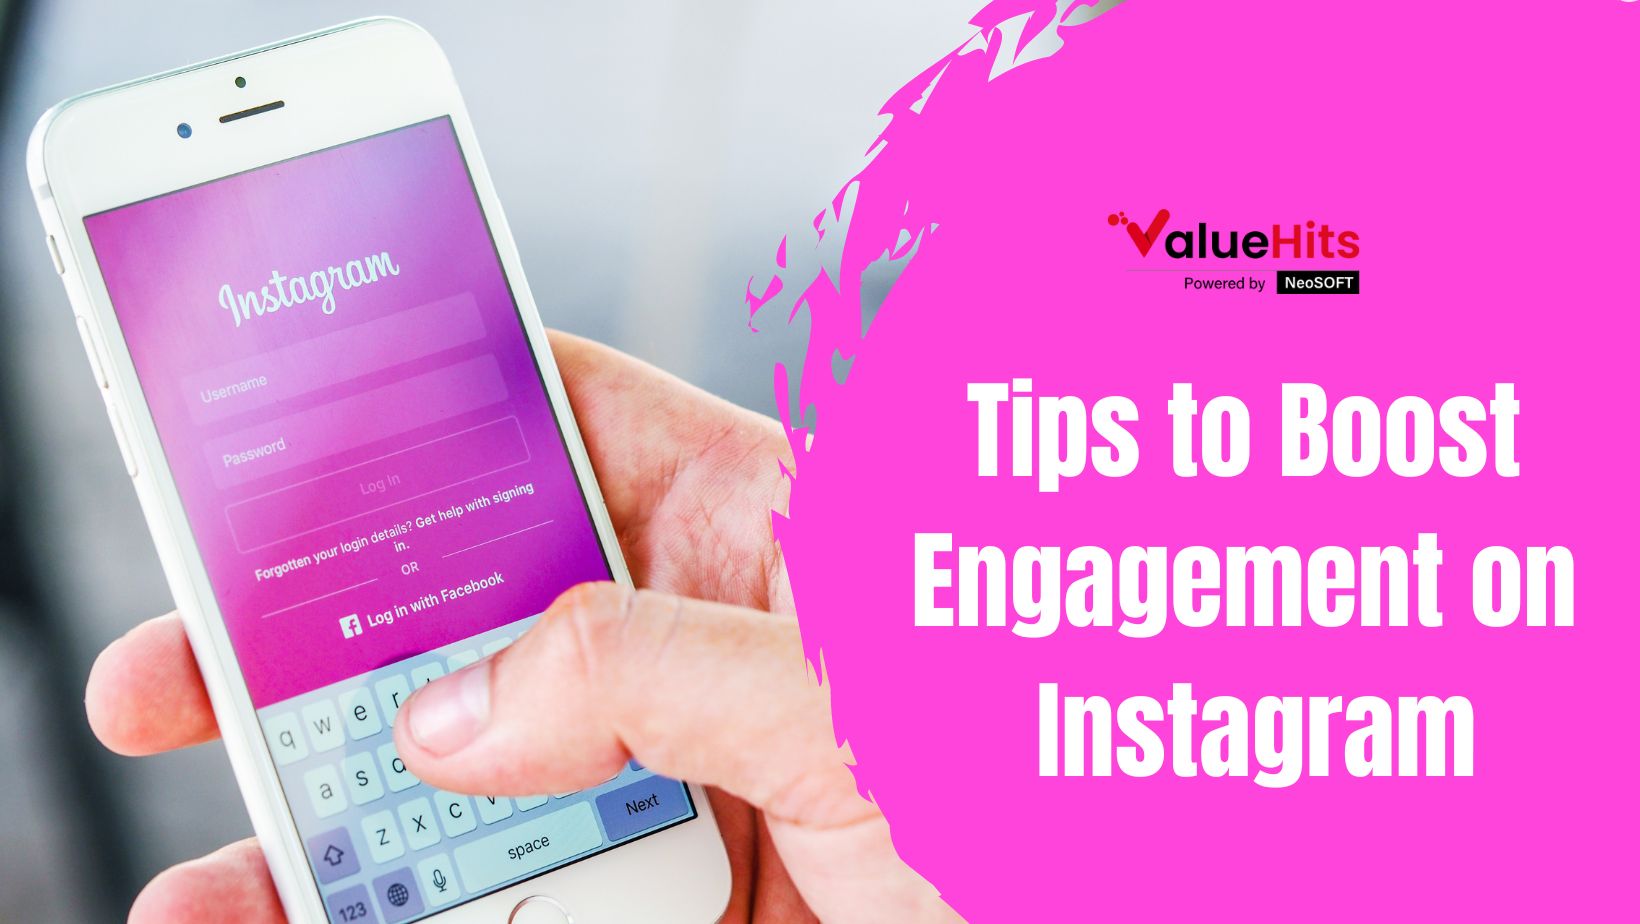 Tips to Boost Engagement on Instagram